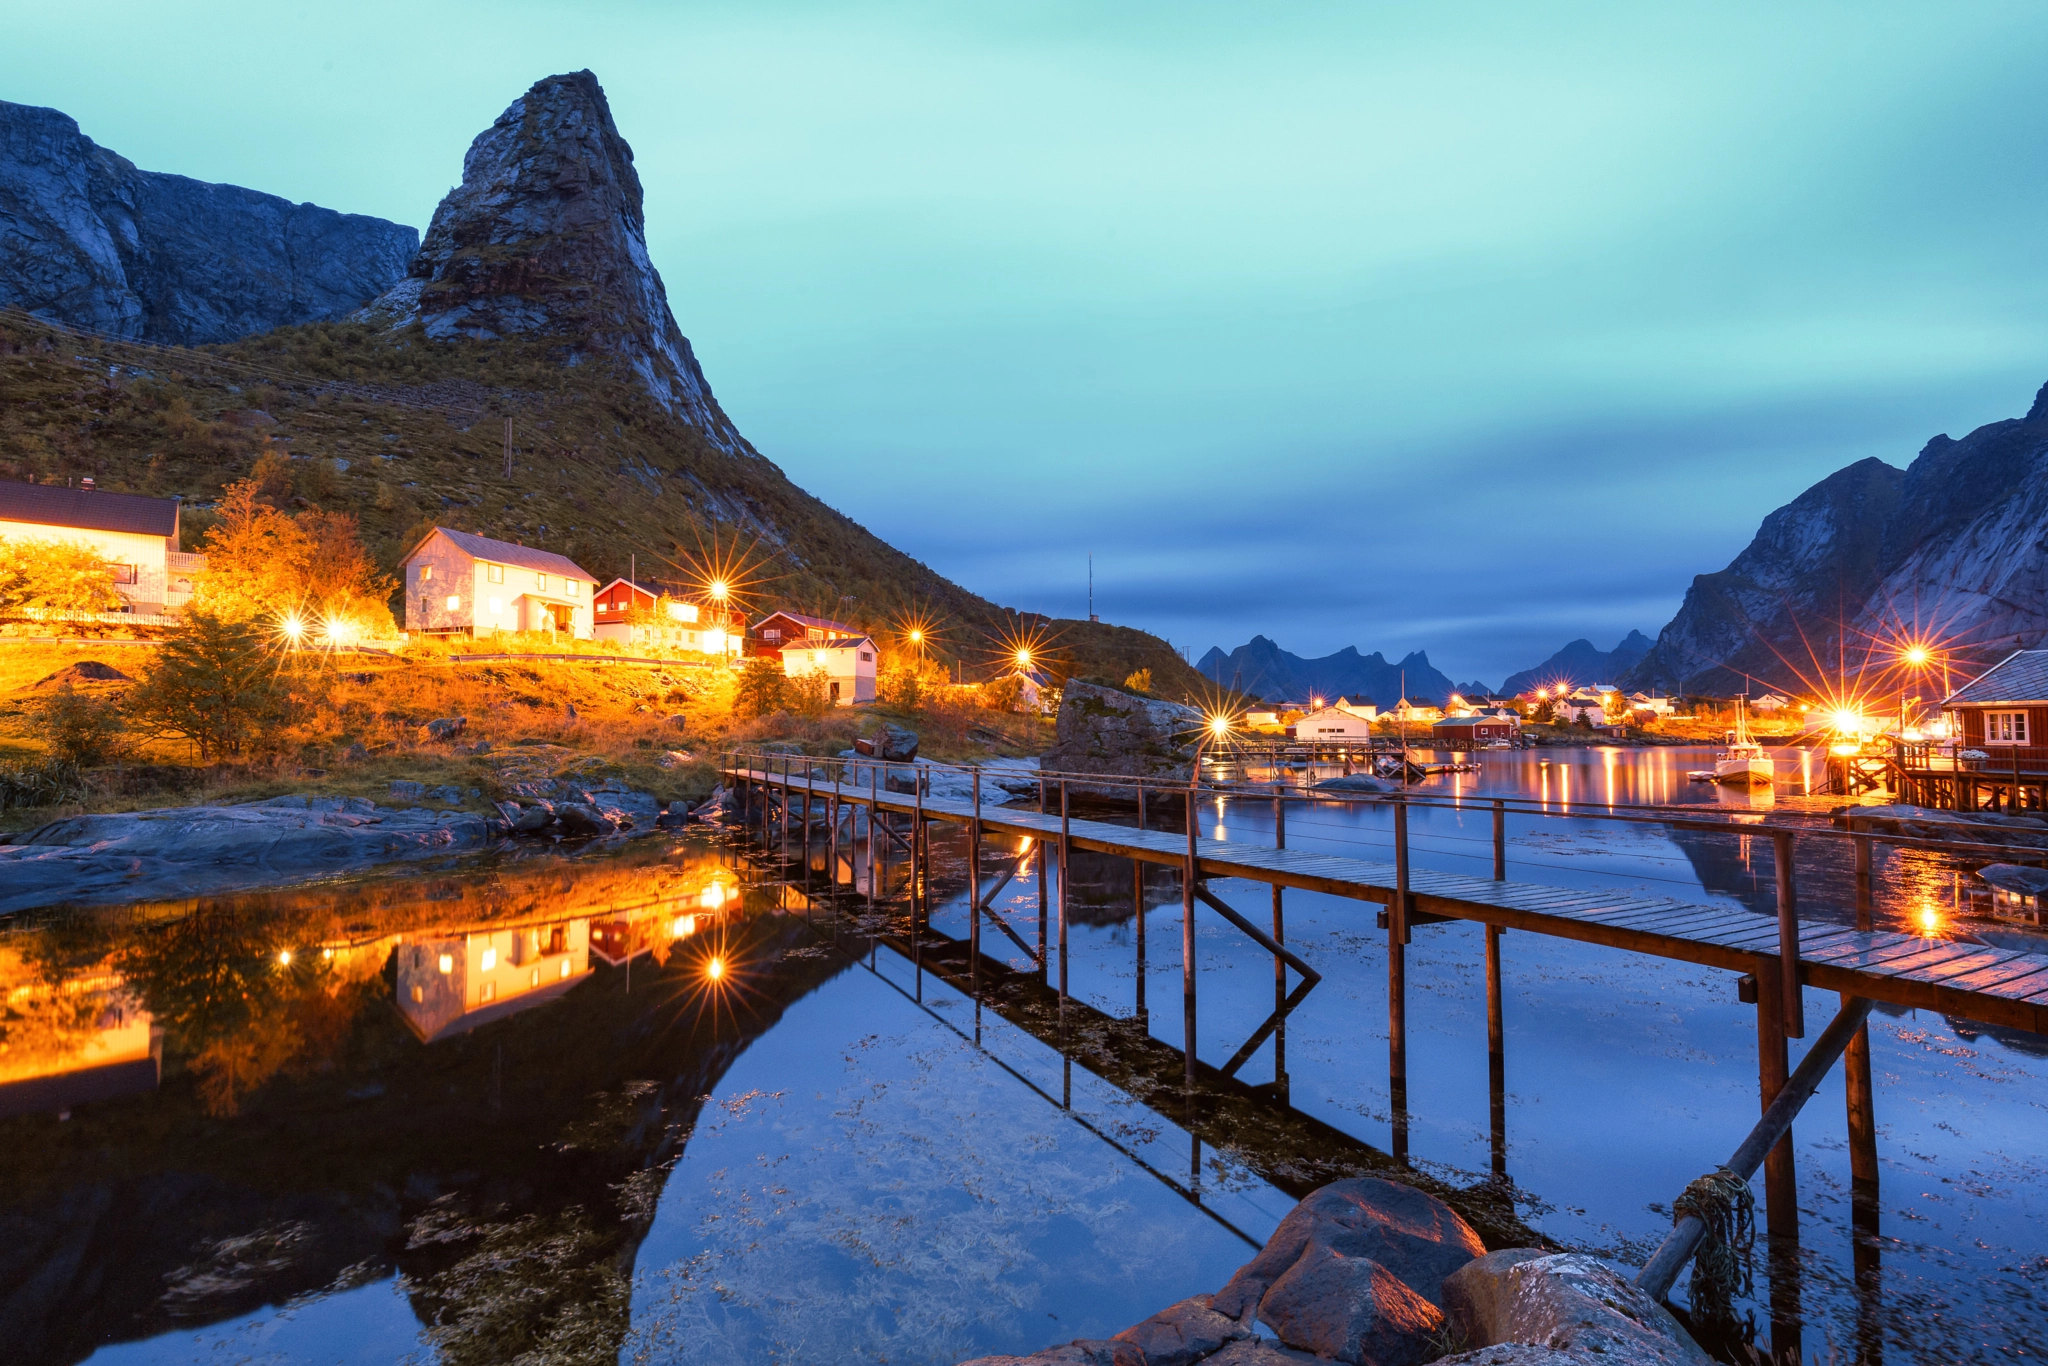 Sony a7R II sample photo. Blue hour at reine photography